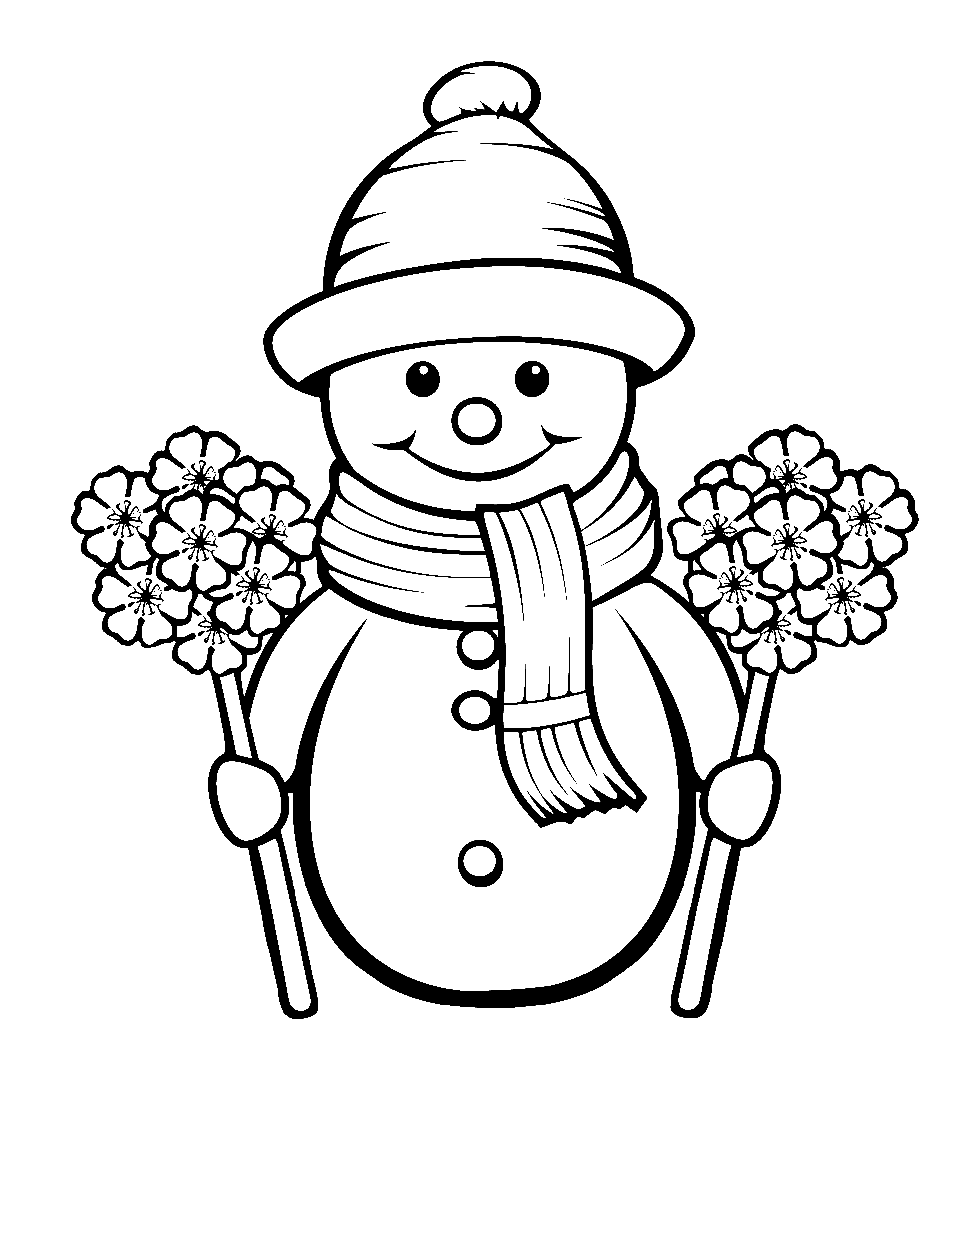 Gardener Snowman with Flowers Coloring Page - A snowman with a hat surrounded by winter flowers.